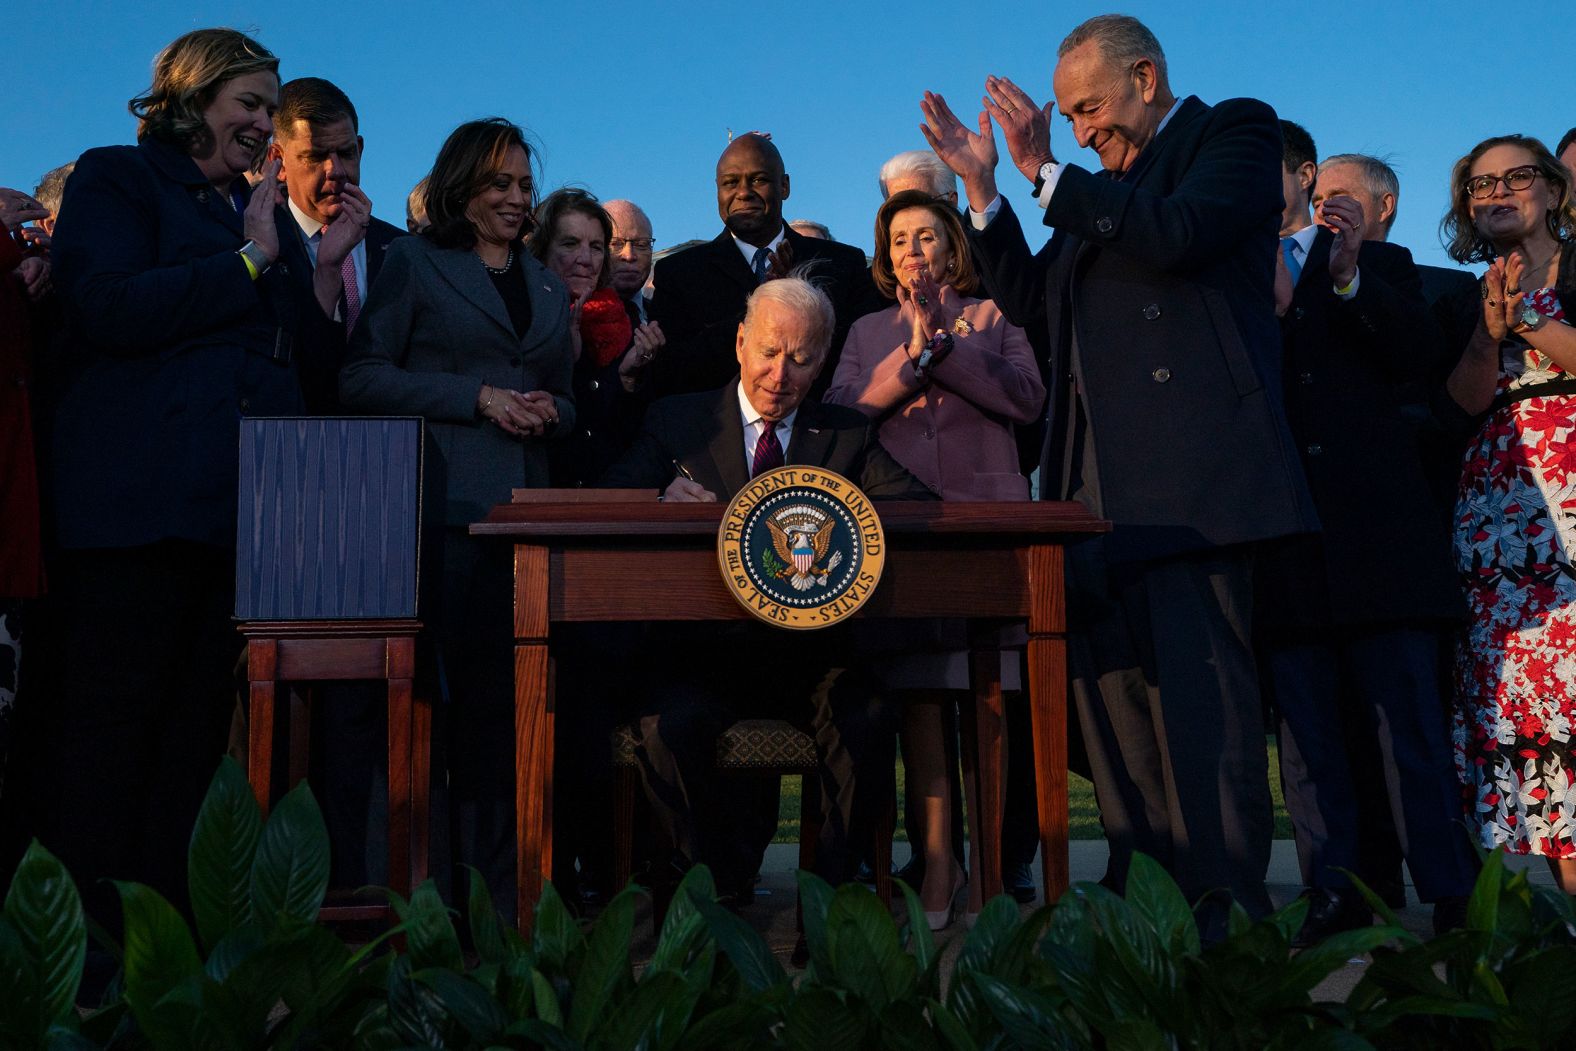 Biden signs a <a href="index.php?page=&url=https%3A%2F%2Fwww.cnn.com%2F2021%2F11%2F15%2Fpolitics%2Fbiden-signing-ceremony-infrastructure-bill-white-house%2Findex.html" target="_blank">bipartisan infrastructure bill</a> into law during a White House ceremony in November 2021. The $1.2 trillion legislation focuses on infrastructure such as roads and bridges.